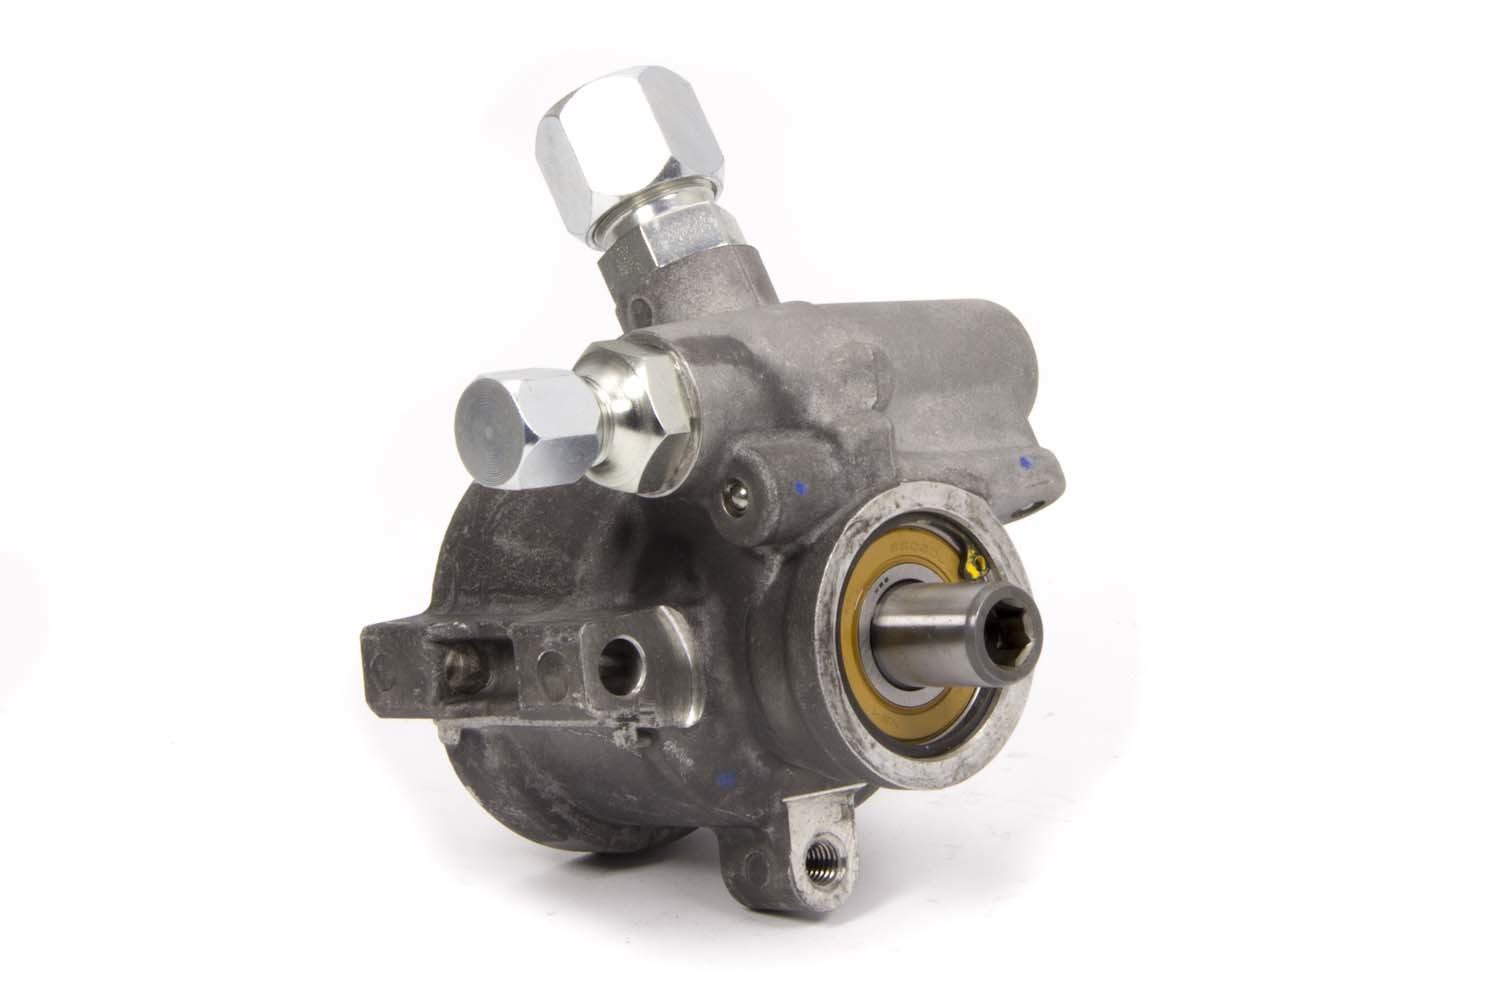 Sweet Manufacturing 305-60330 Power Steering Pump, GM Type 2, 3 gpm, 1300 psi, Aluminum, Natural, Each